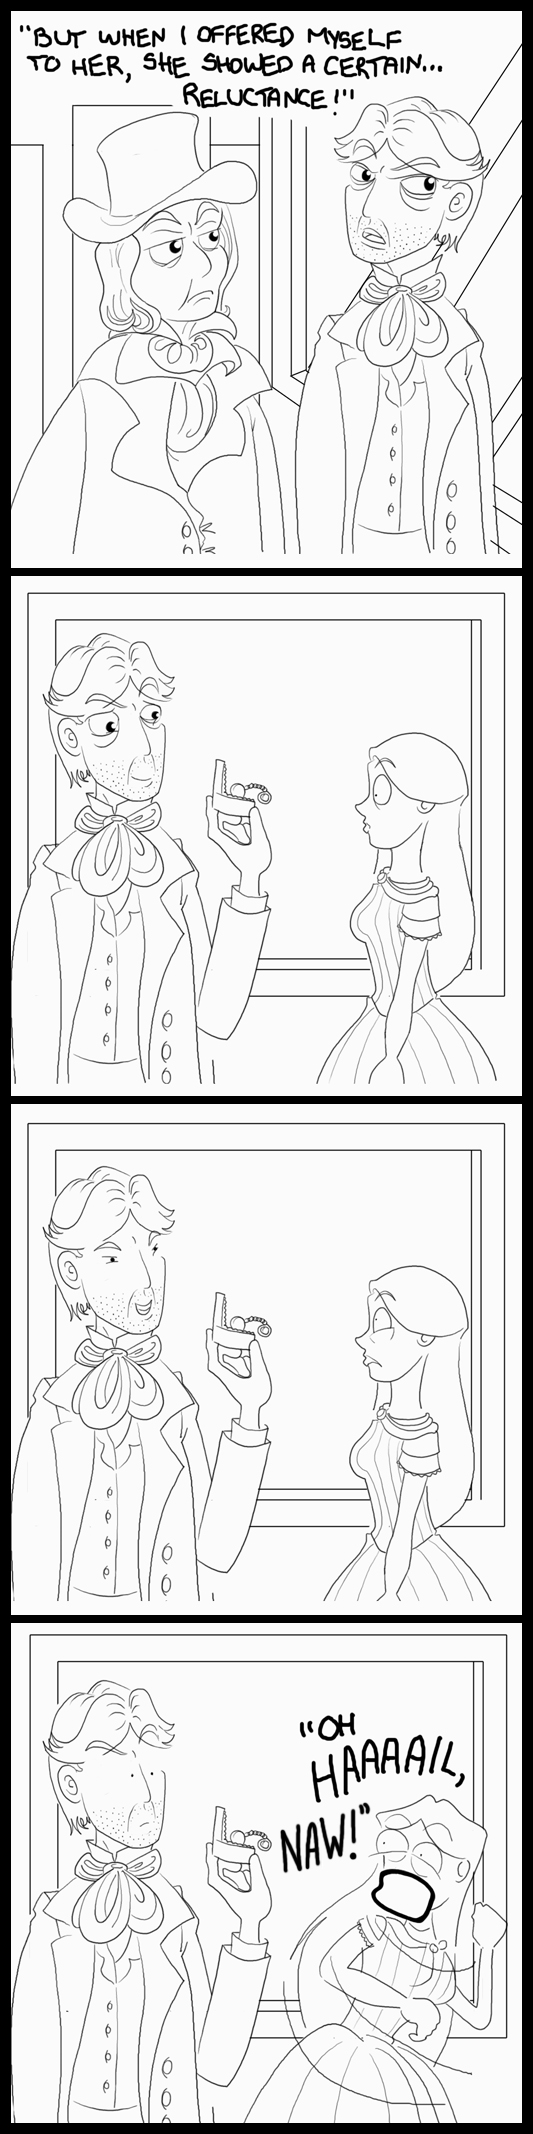 Sweeney Todd Comic - Reluctance by deaddoll00